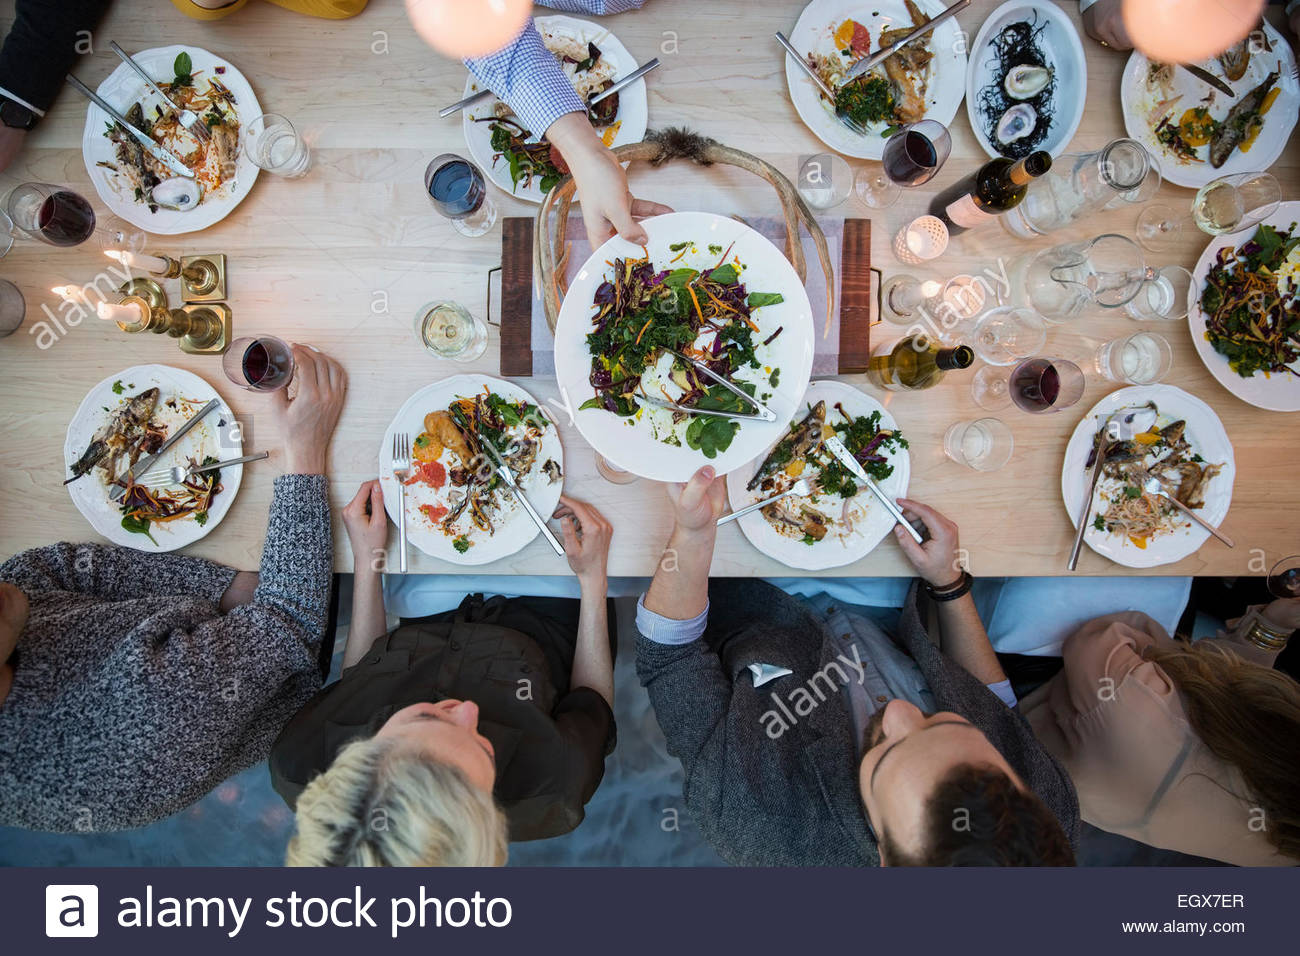 View from above friends eating at restaurant table Stock Photo